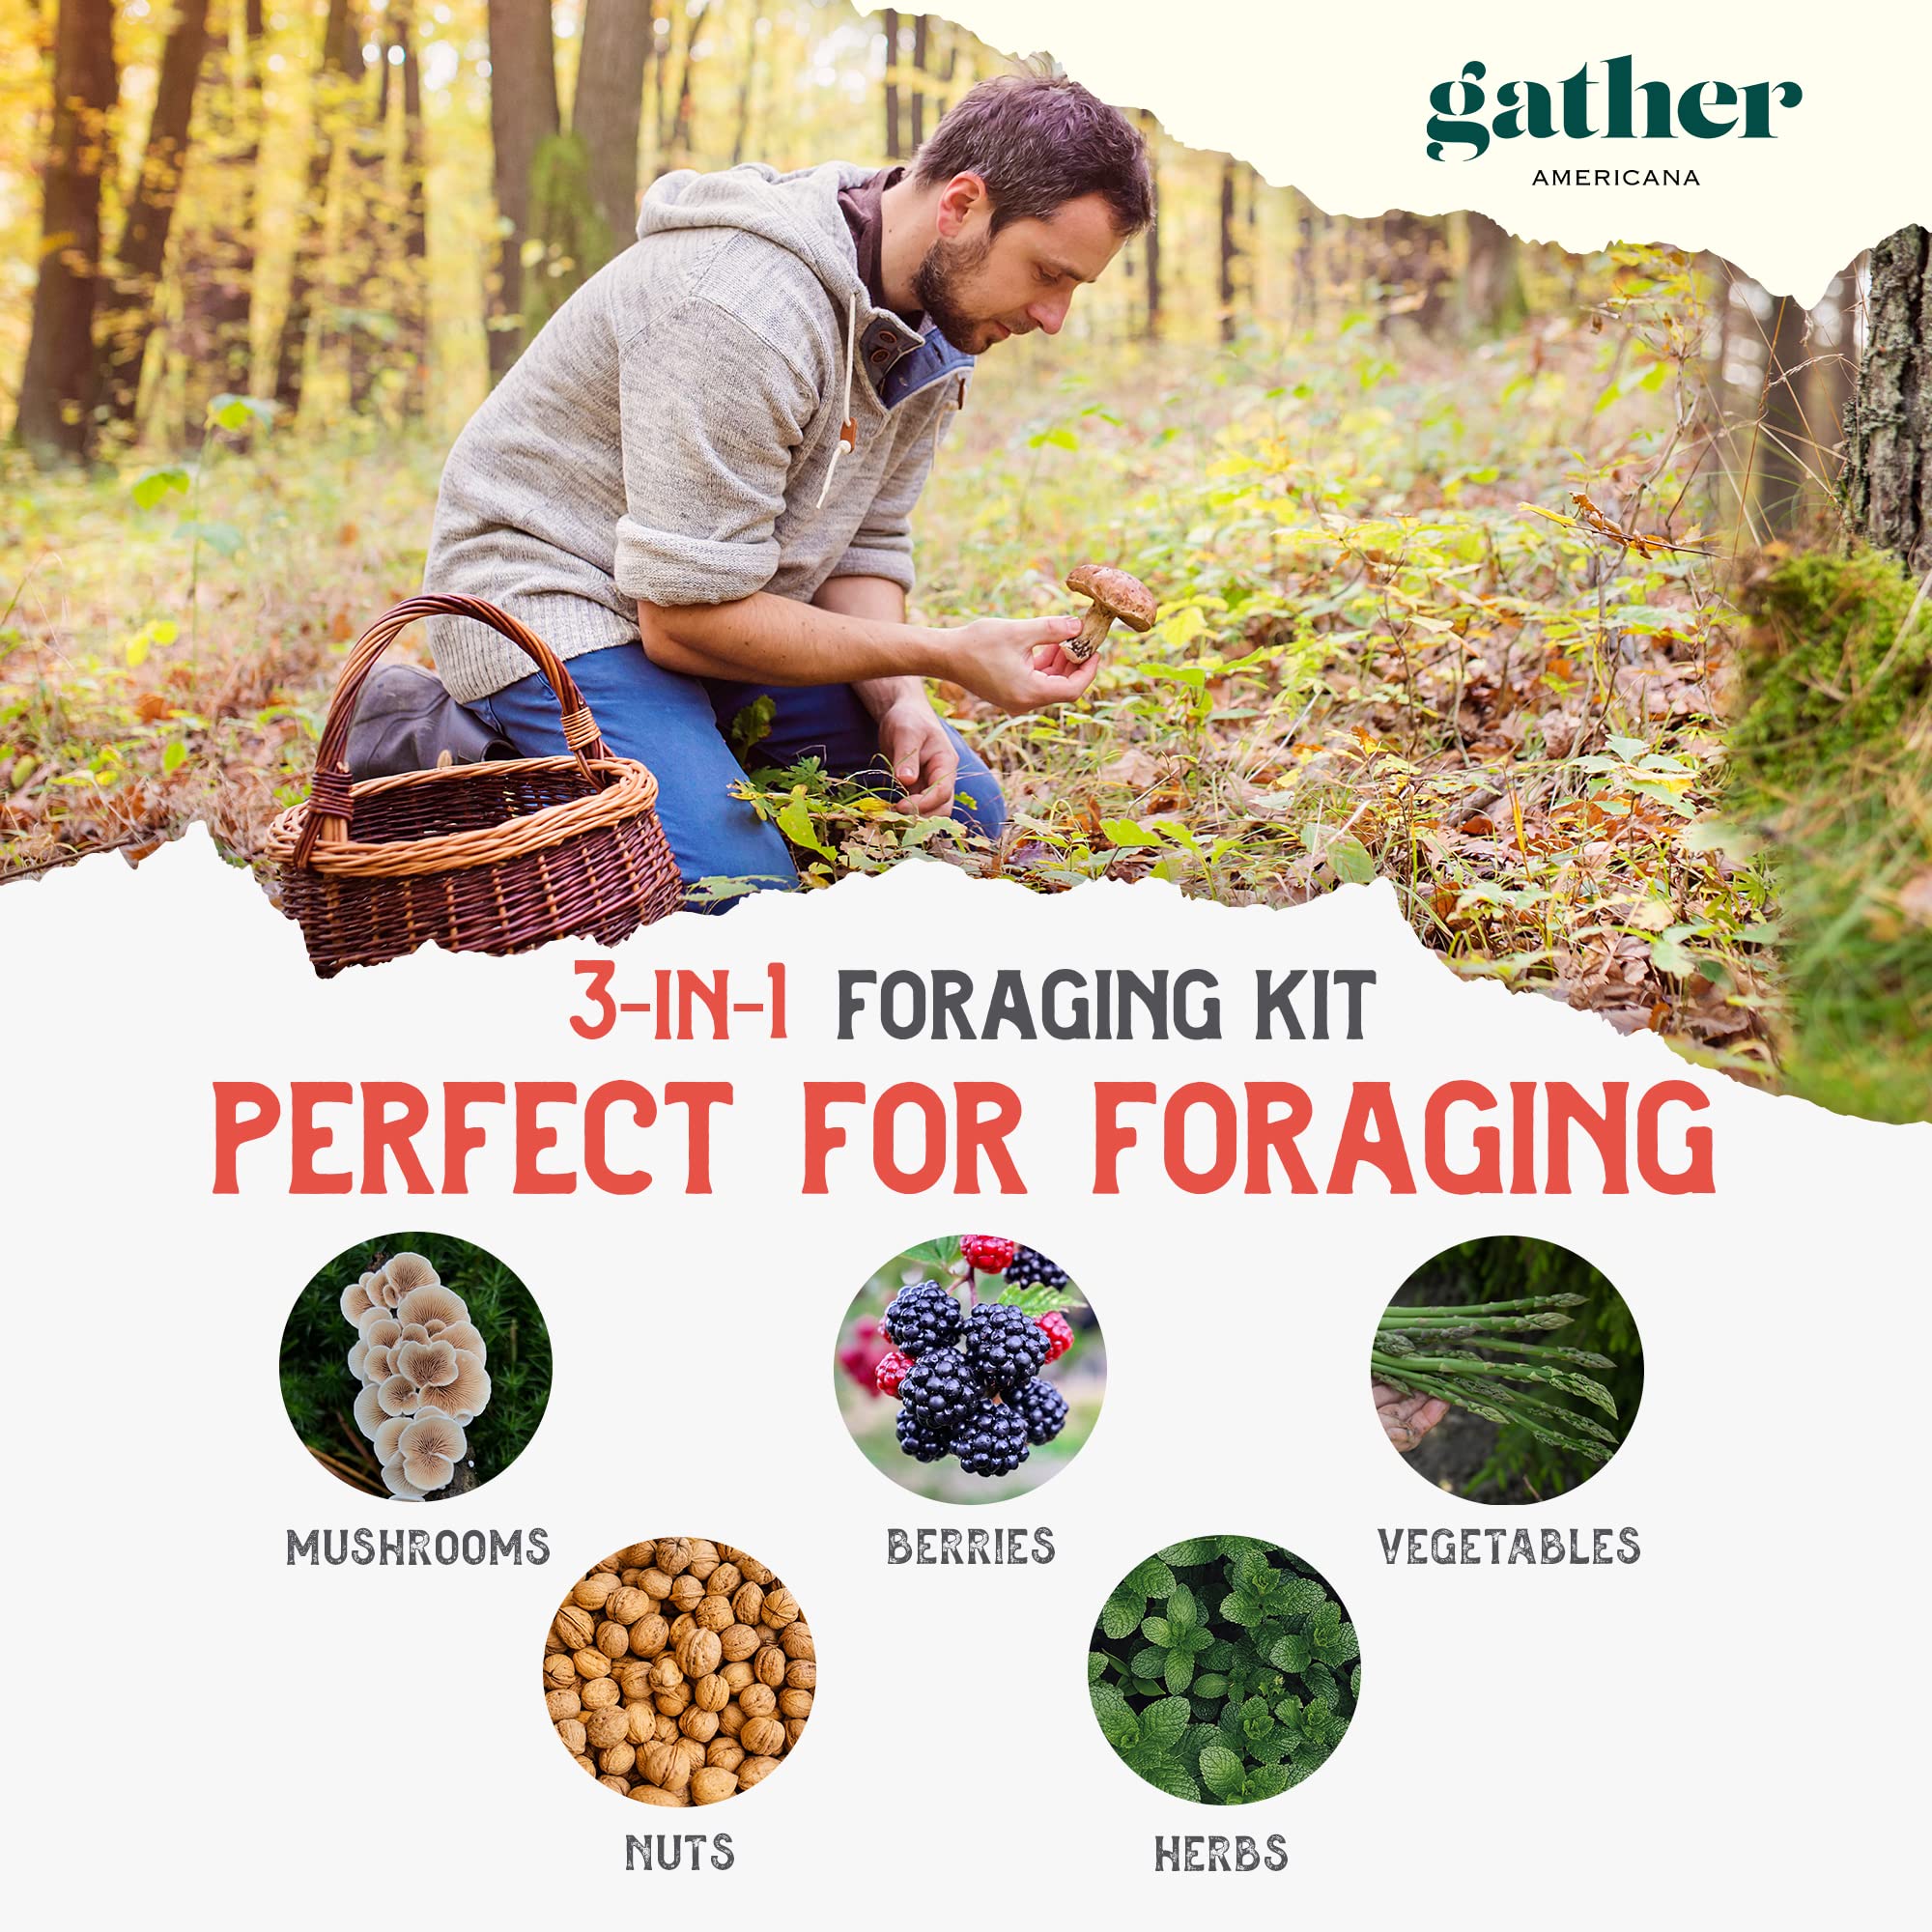 Gather Americana 3-in-1 Foraging Kit - Harvest Natures Bounty